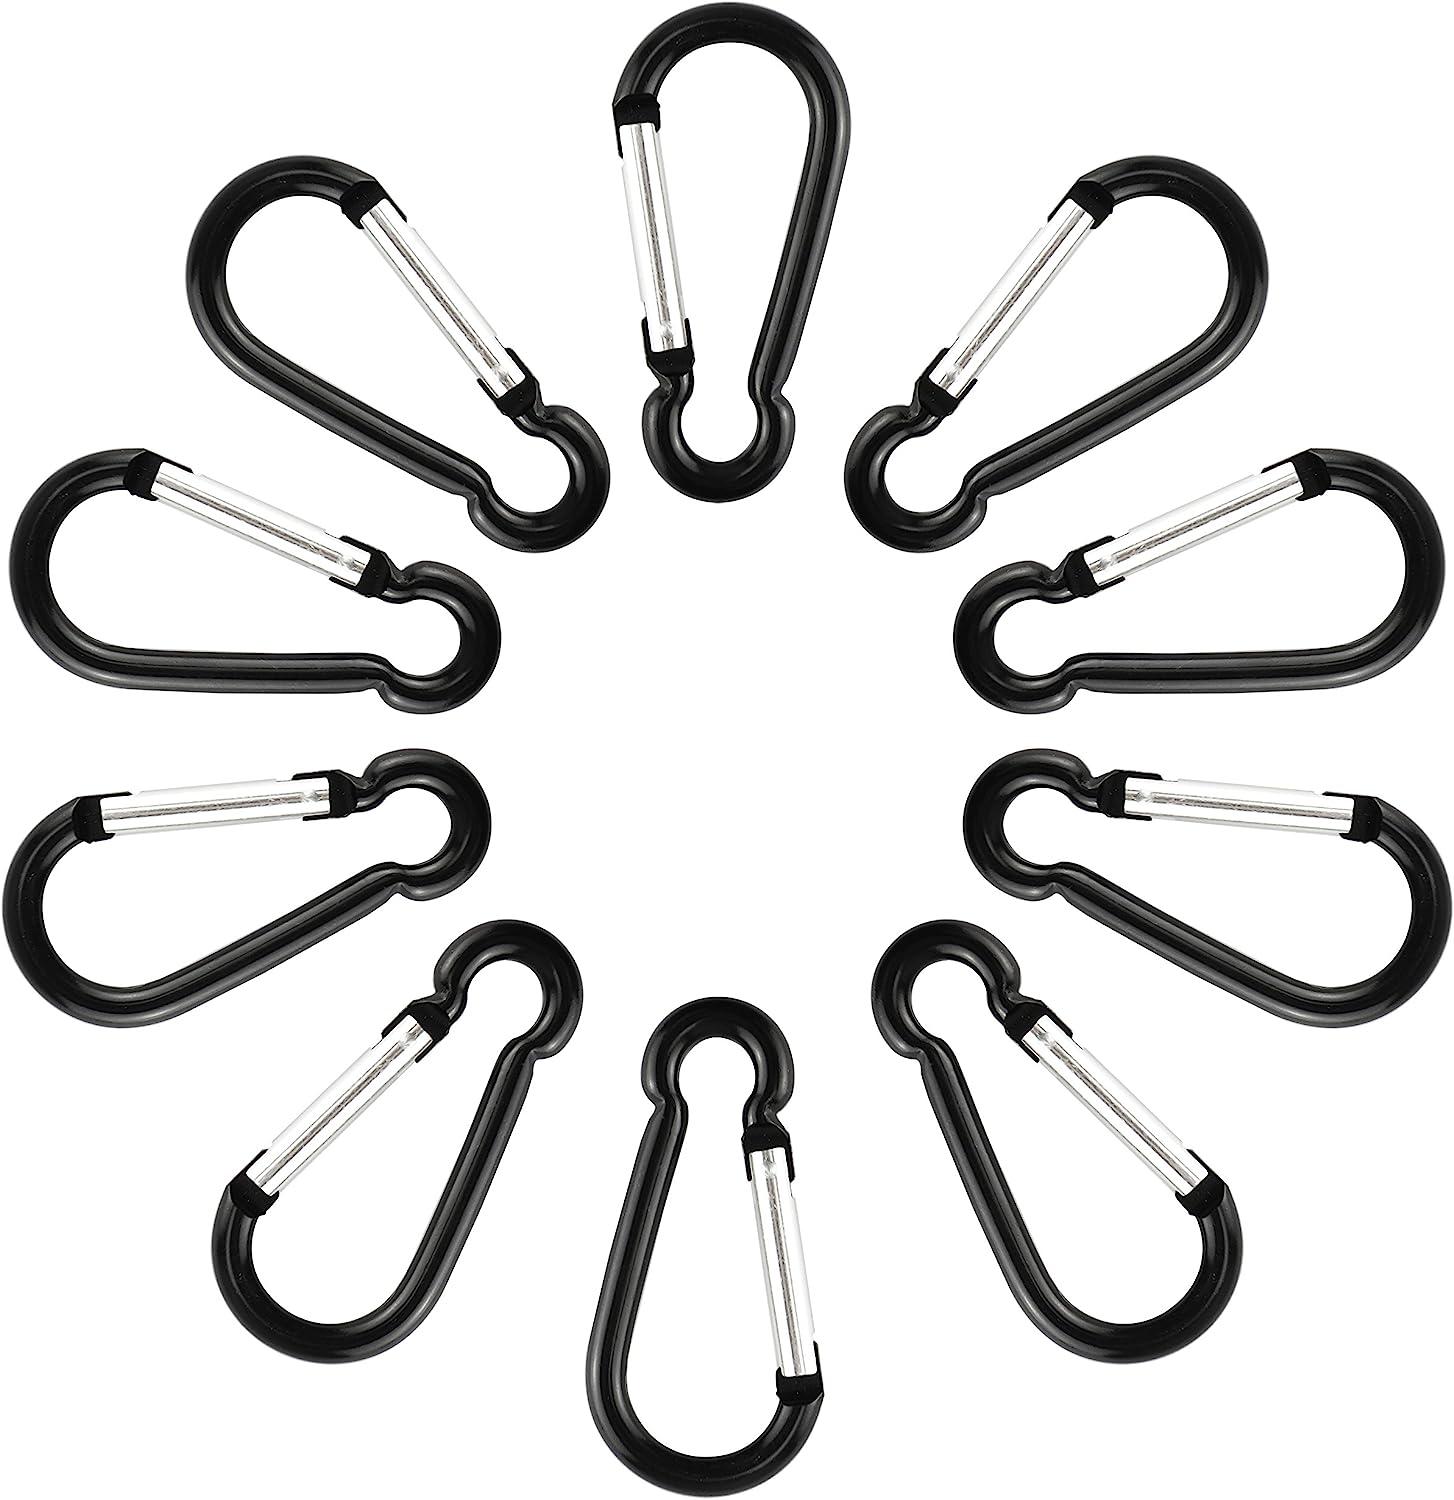  5 Color 20PCS 2.3 Carabiner Clip D Ring Carabiners Small  Carabiner Keychain Spring Snap Hooks, Mini Carabiner Clip Set for Keys, Dog  Leash, Camping Hiking Accessories : Sports & Outdoors